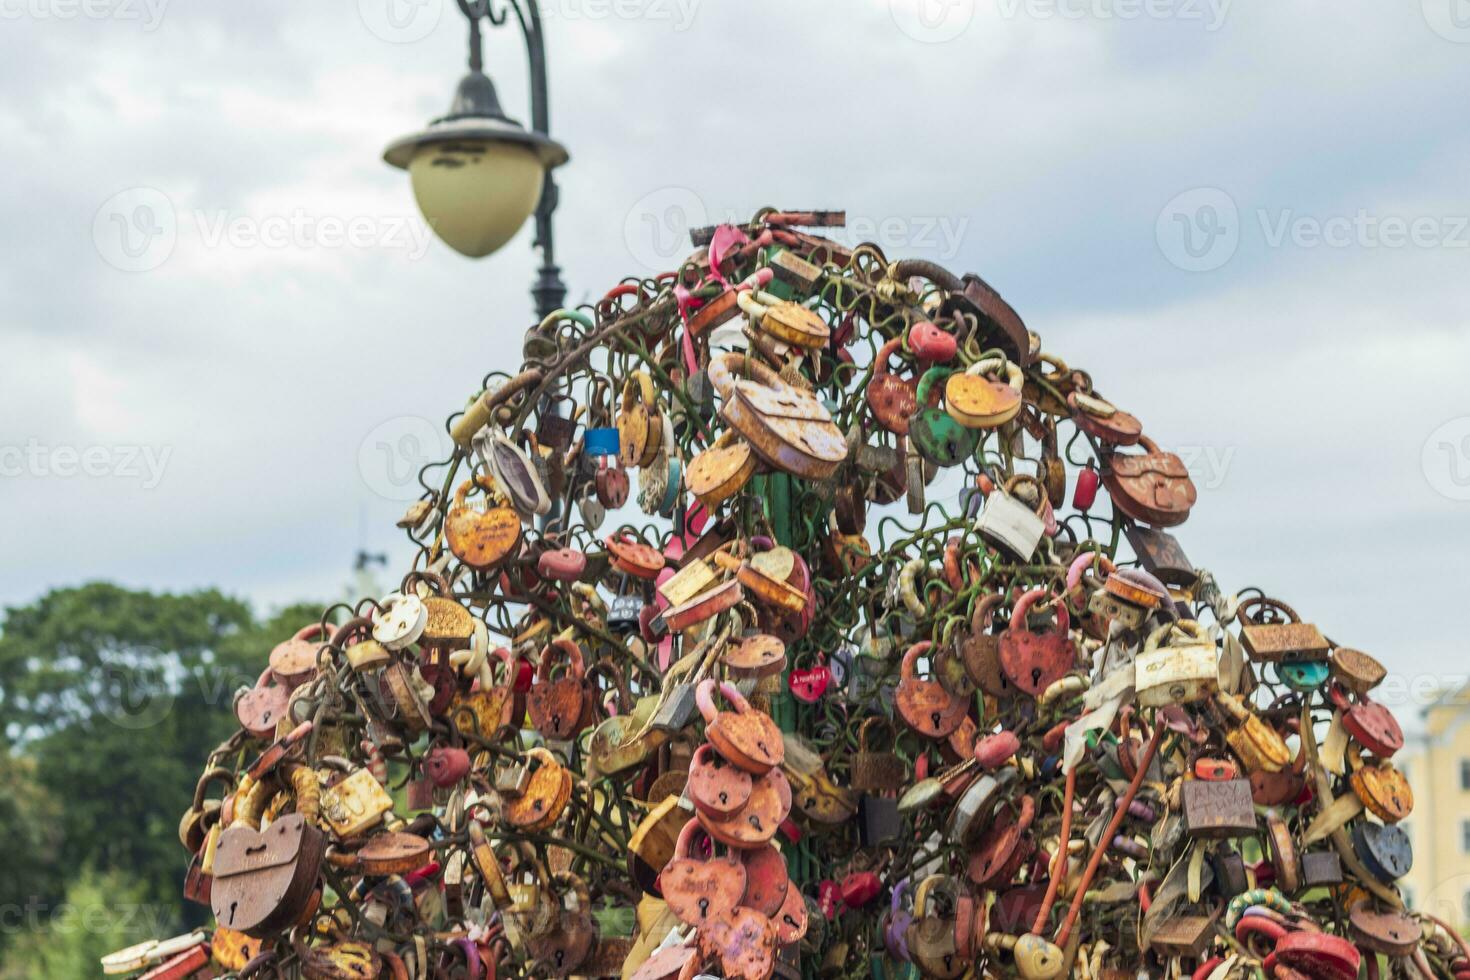 Metal tree structure where couples locking the locks as a sign of true love. Concept photo